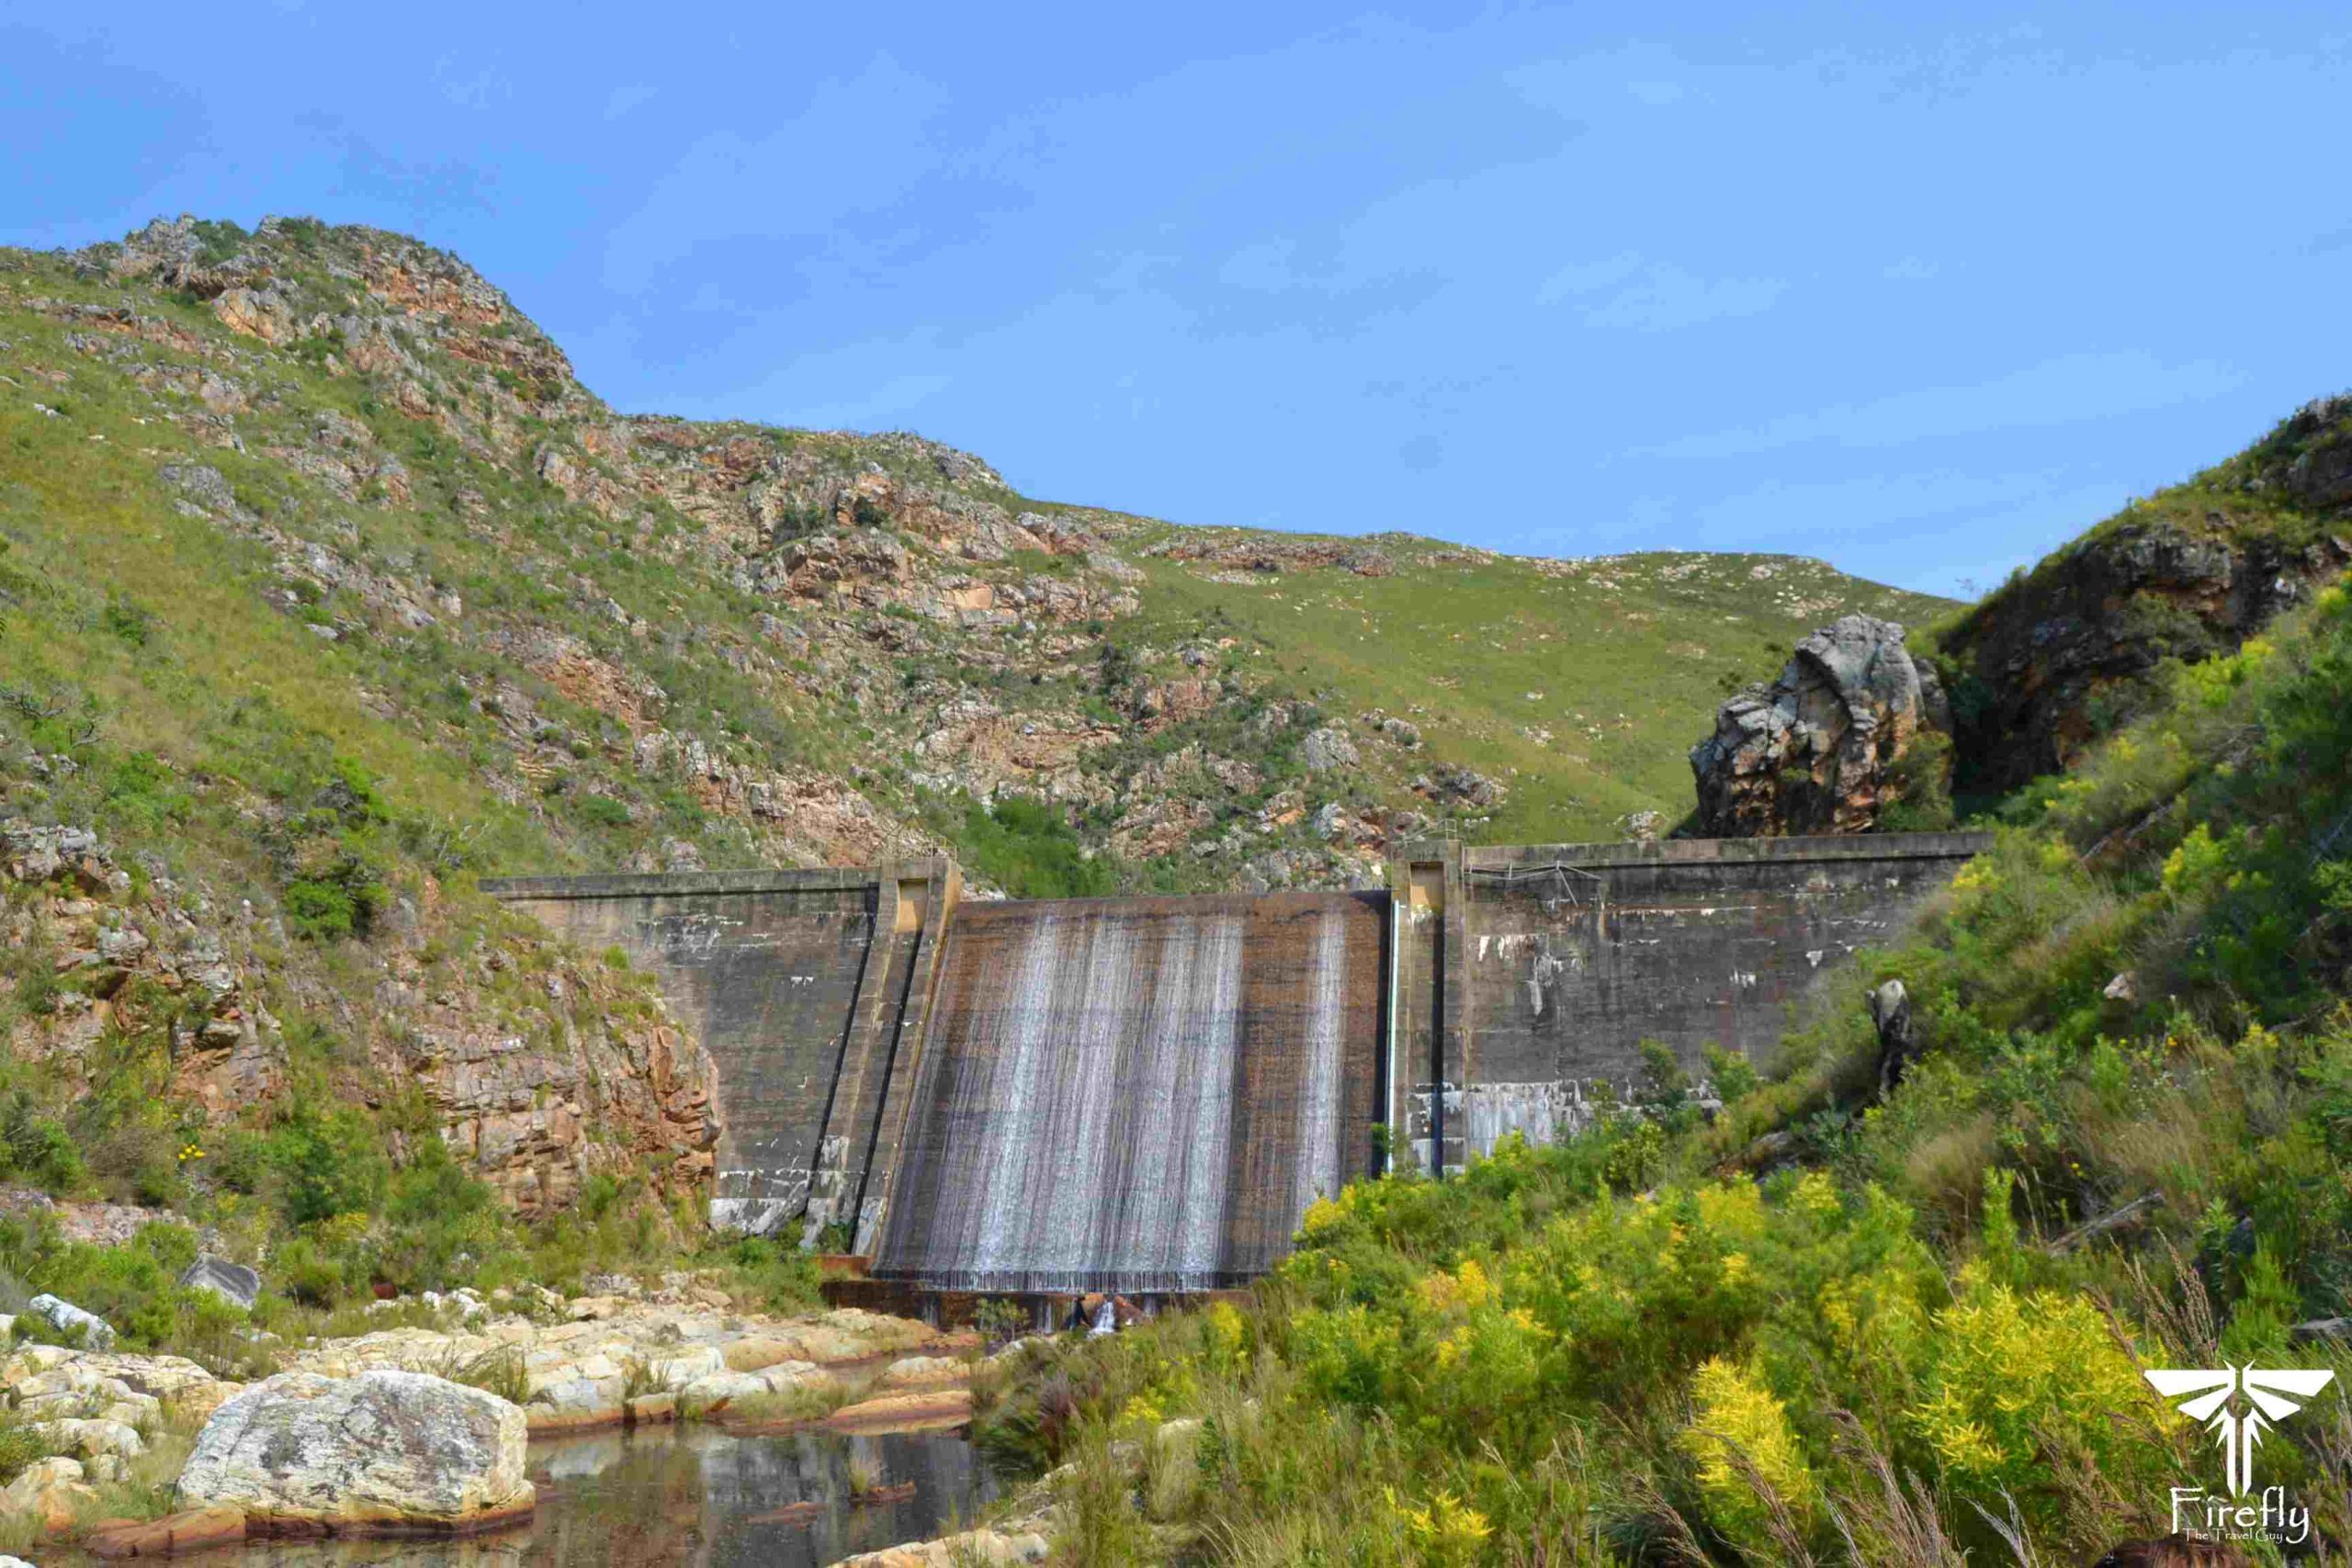 You are currently viewing Hiking to the Lower Van Stadens Dam outside Port Elizabeth